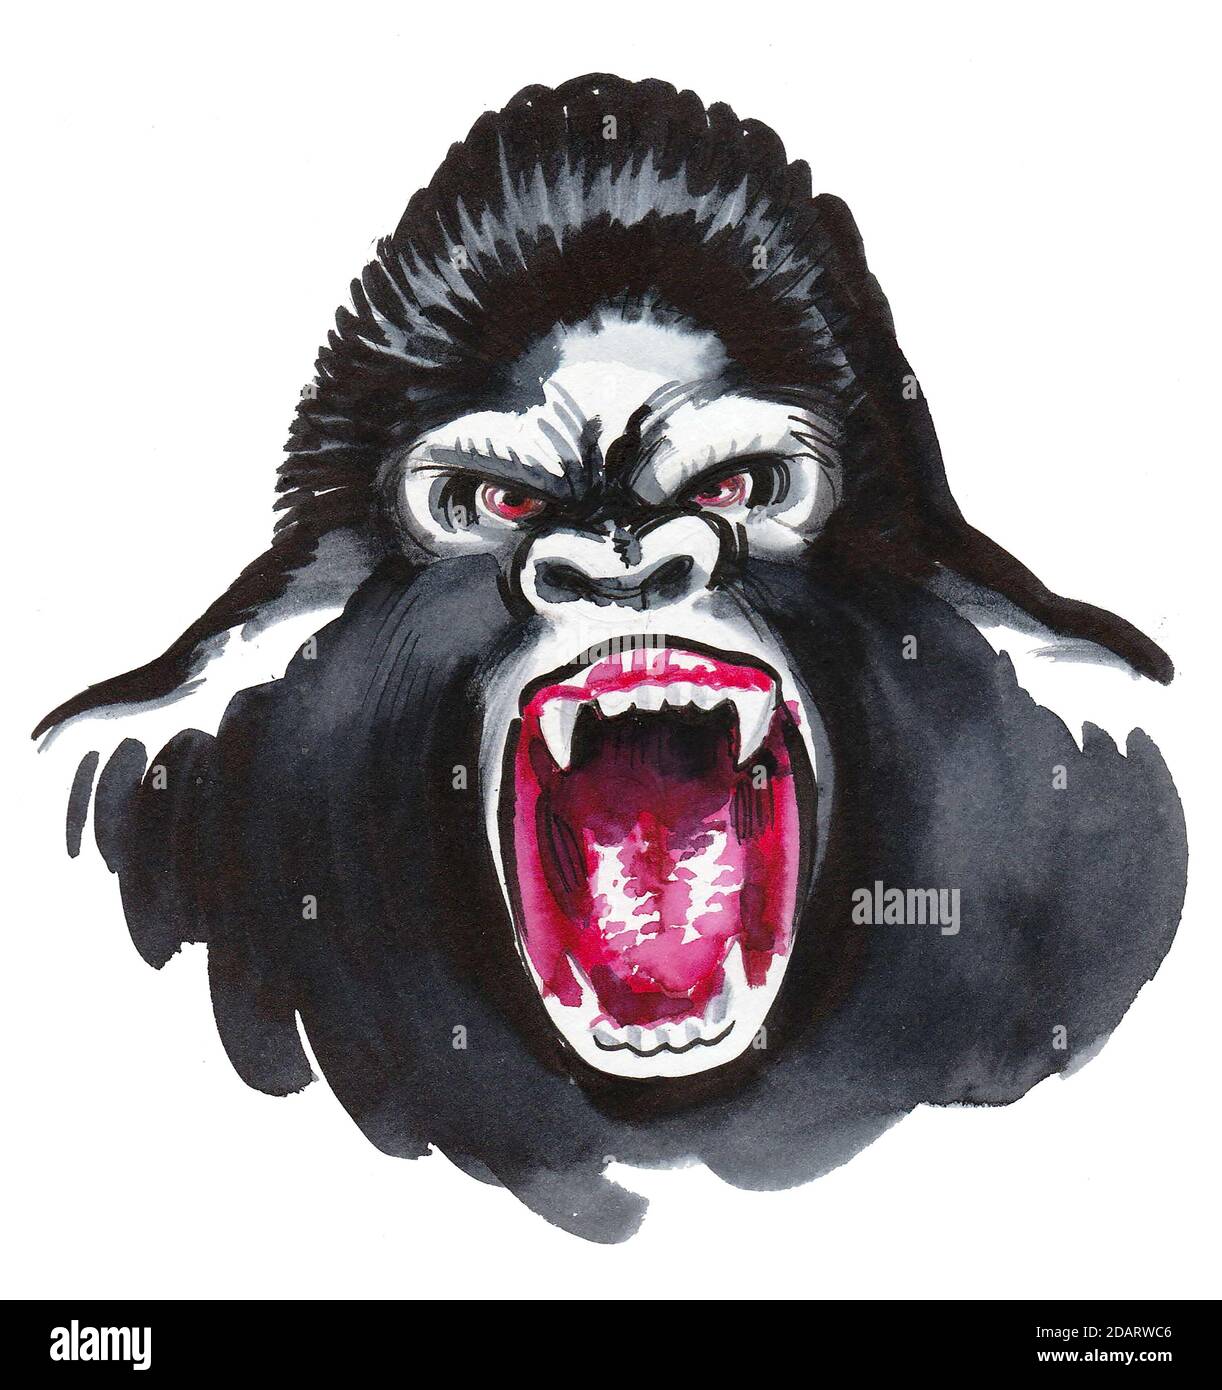 Angry roaring gorilla face. Ink and watercolor drawing Stock Photo